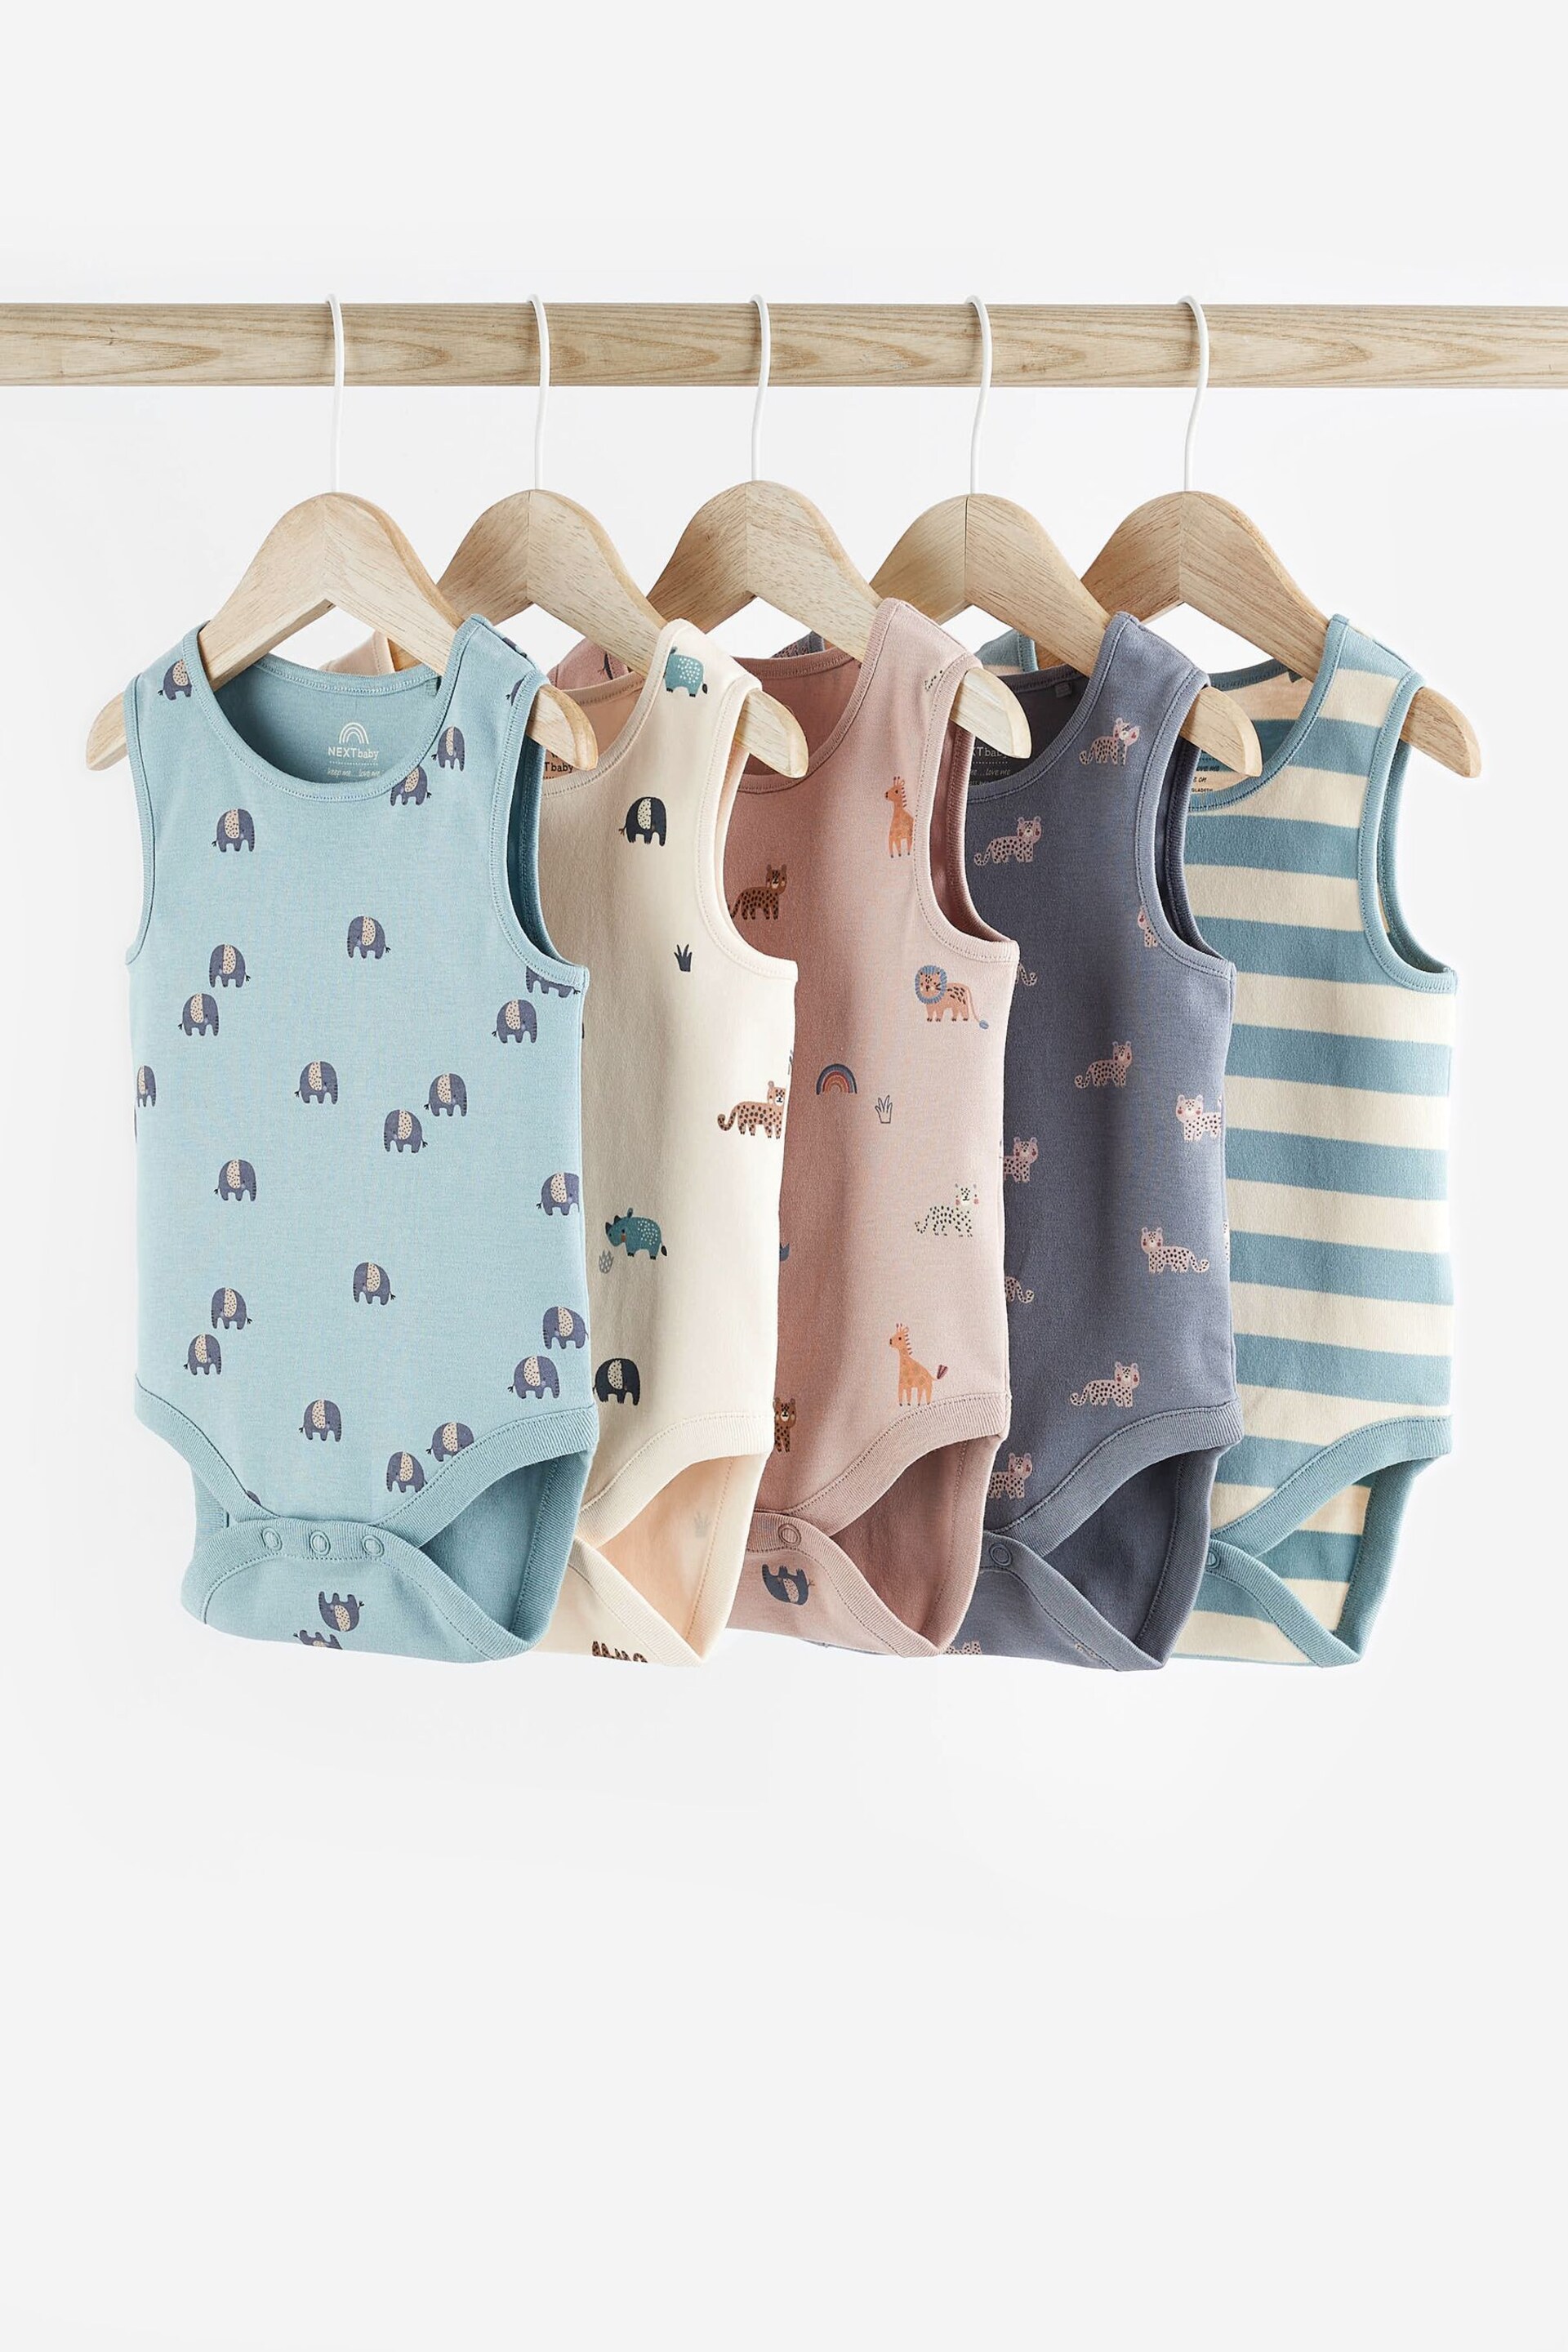 Teal Blue Baby Bodysuits 5 Pack - Image 1 of 6